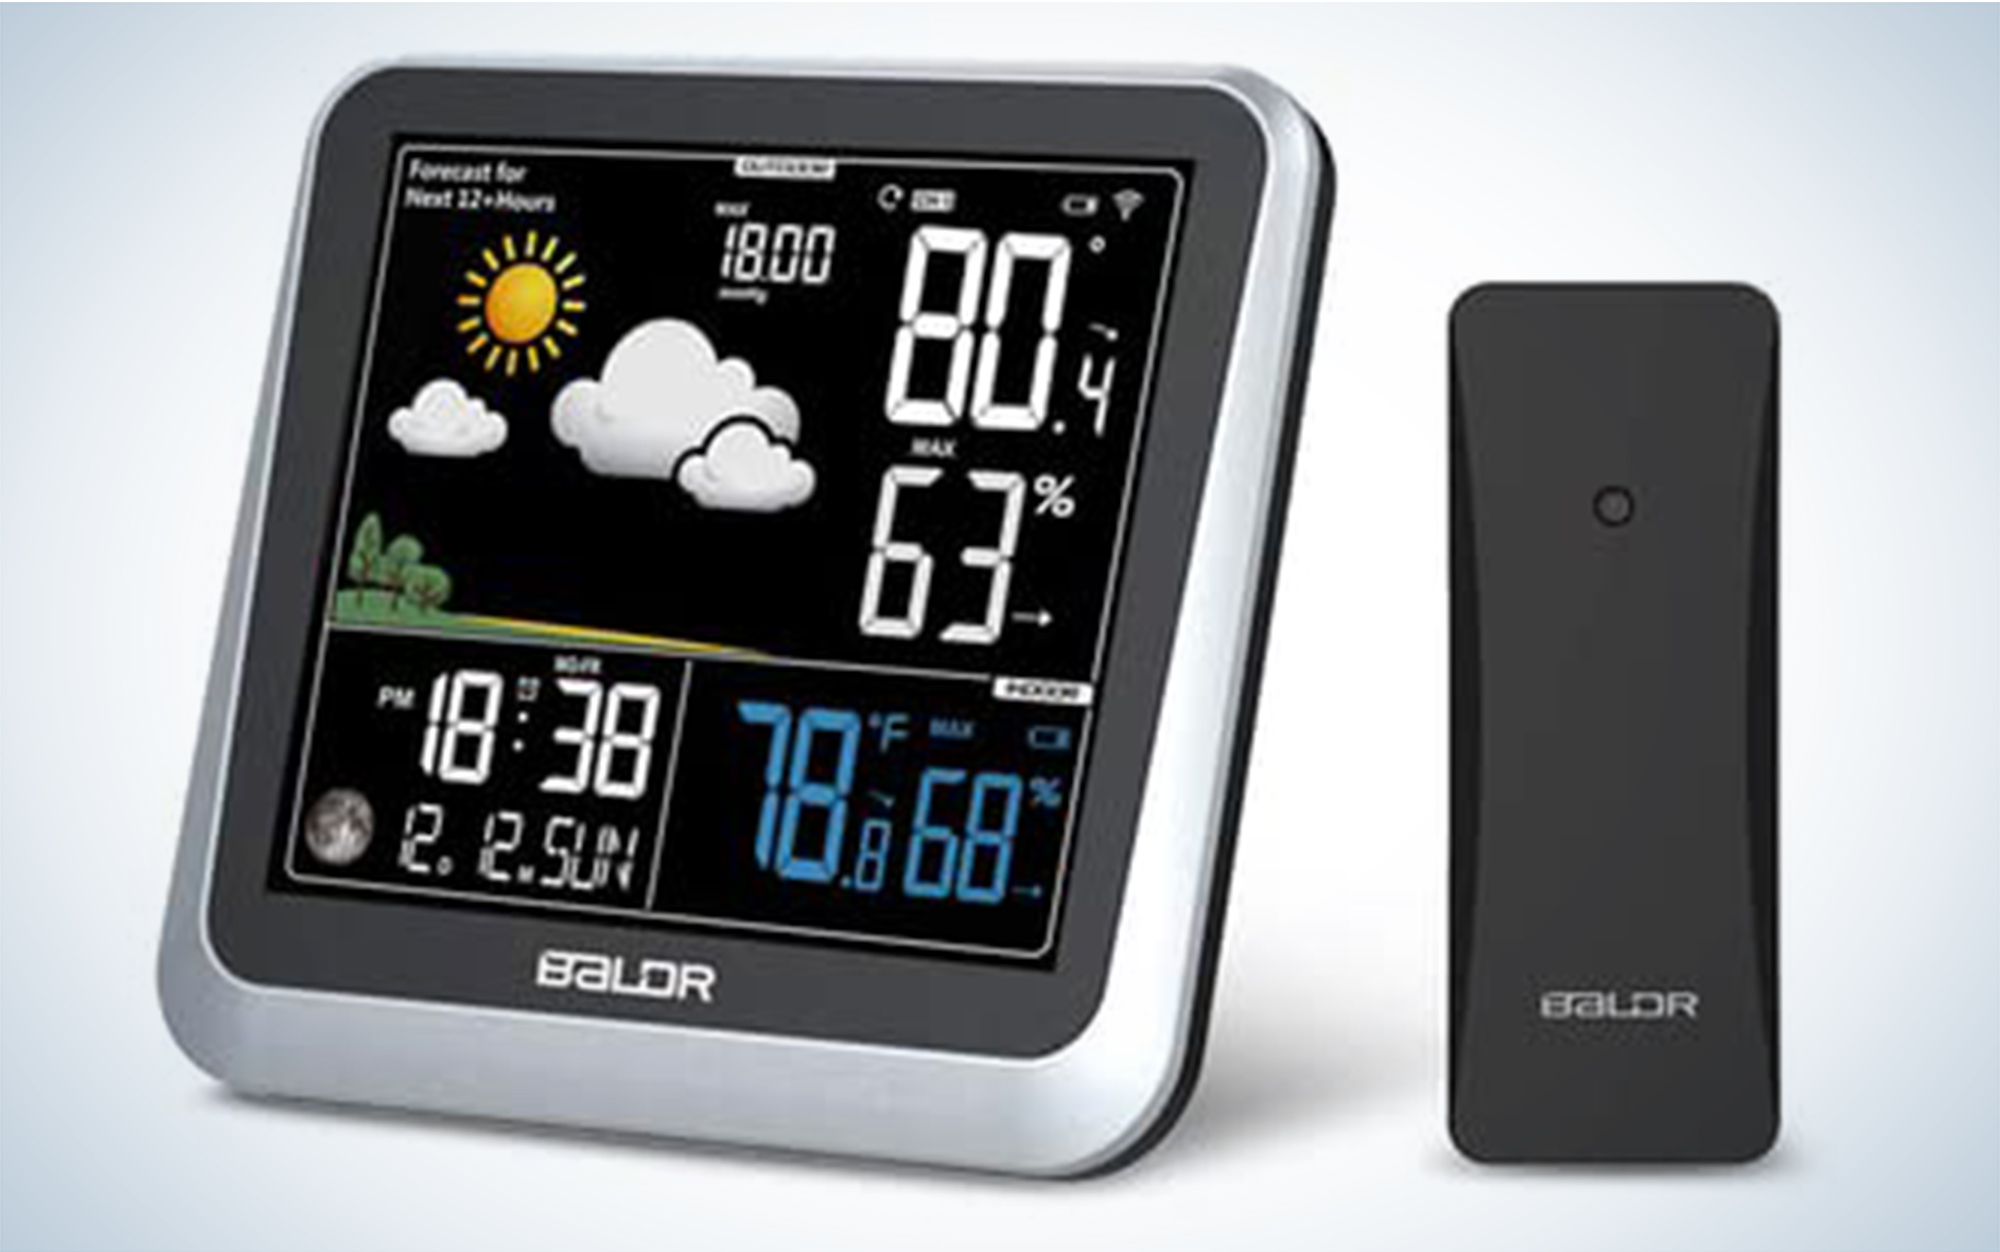 The Baldr Wireless Indoor/Outdoor Weather Station is the best budget.